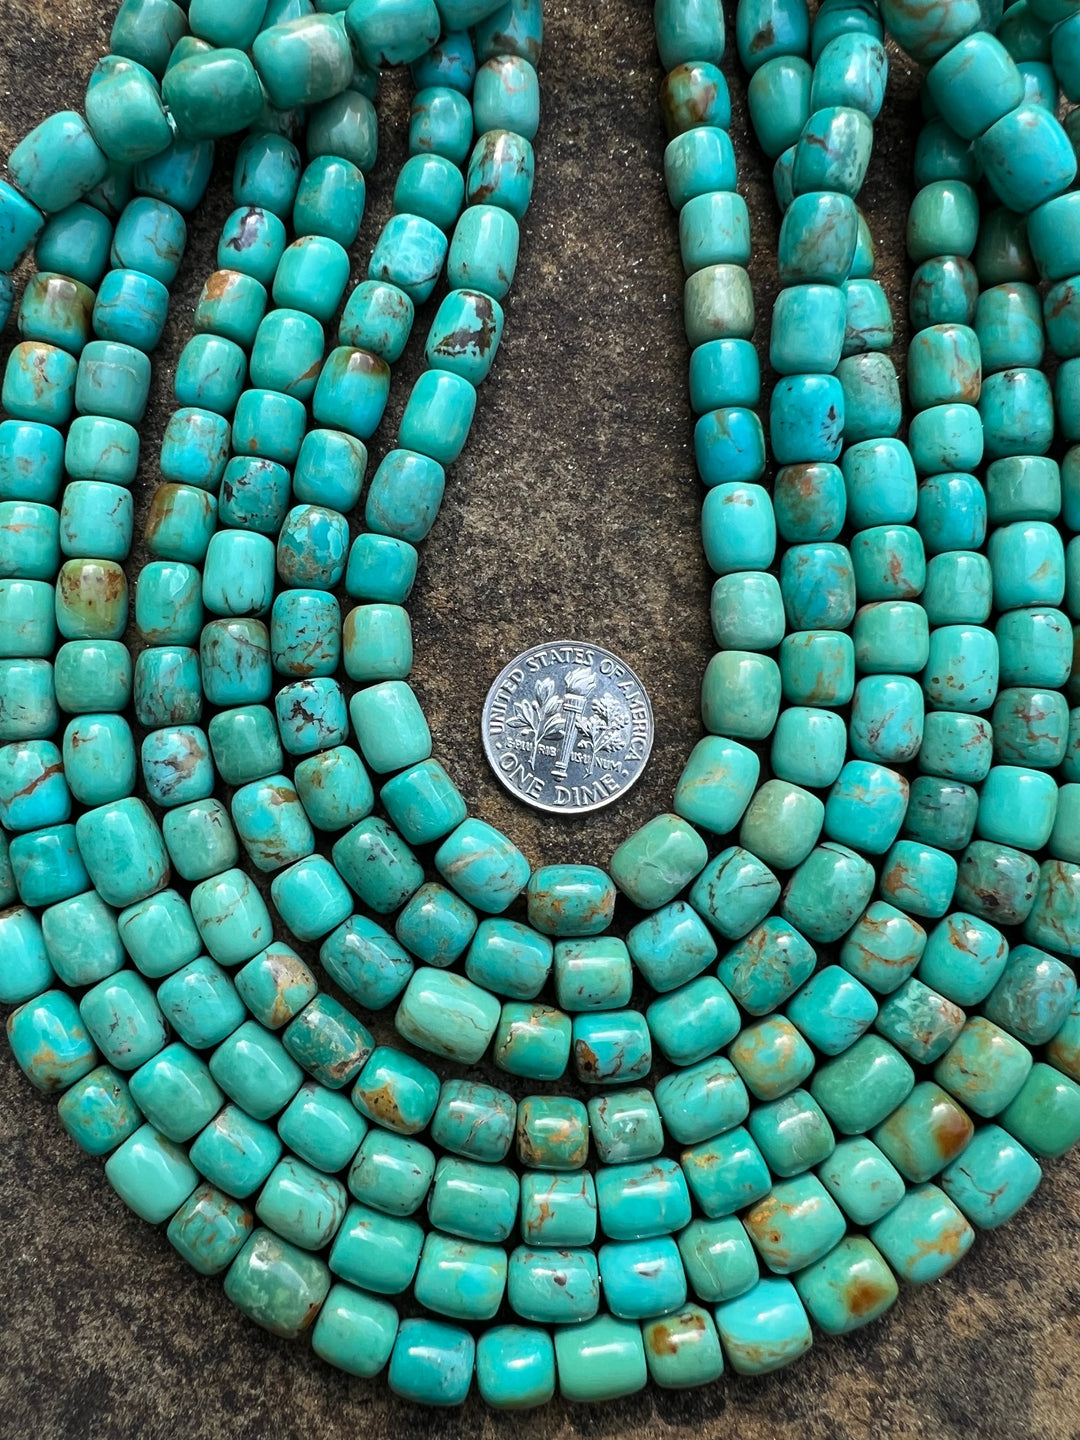 Chilean Turquoise (Chile) 7x8mm Barrel Beads 16 inch strand